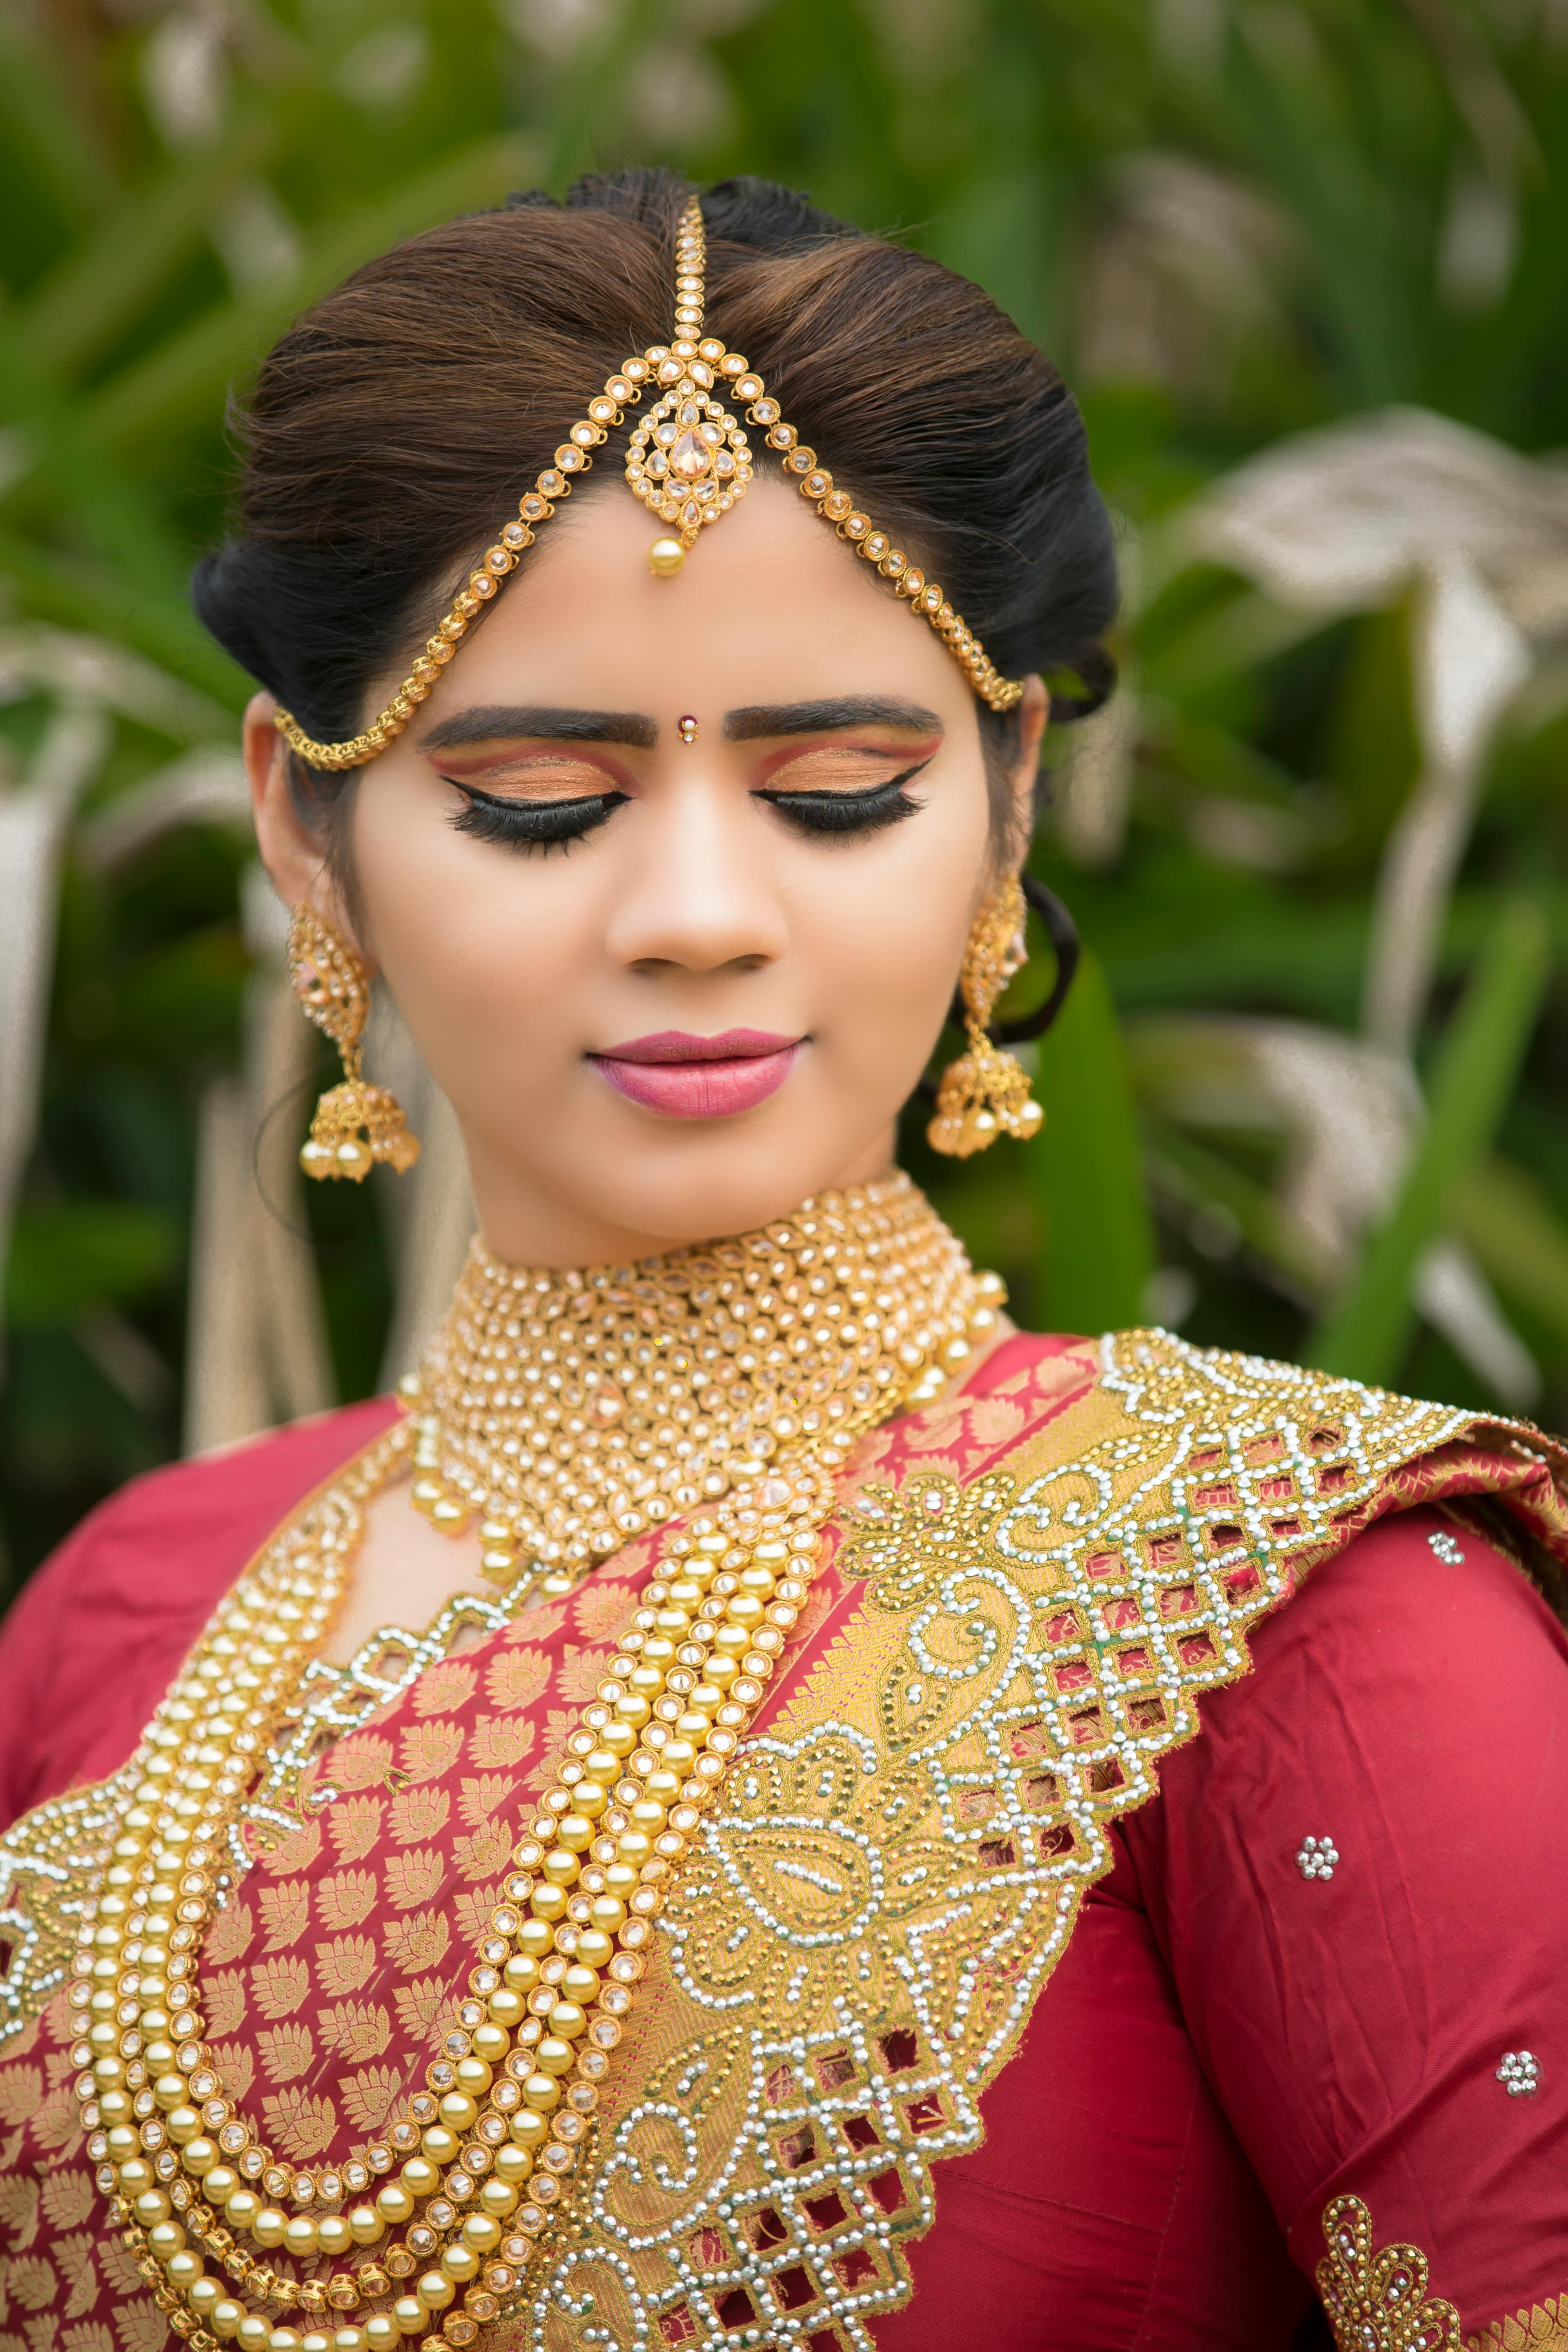 10+ Picture Perfect Close-Up Bridal Poses